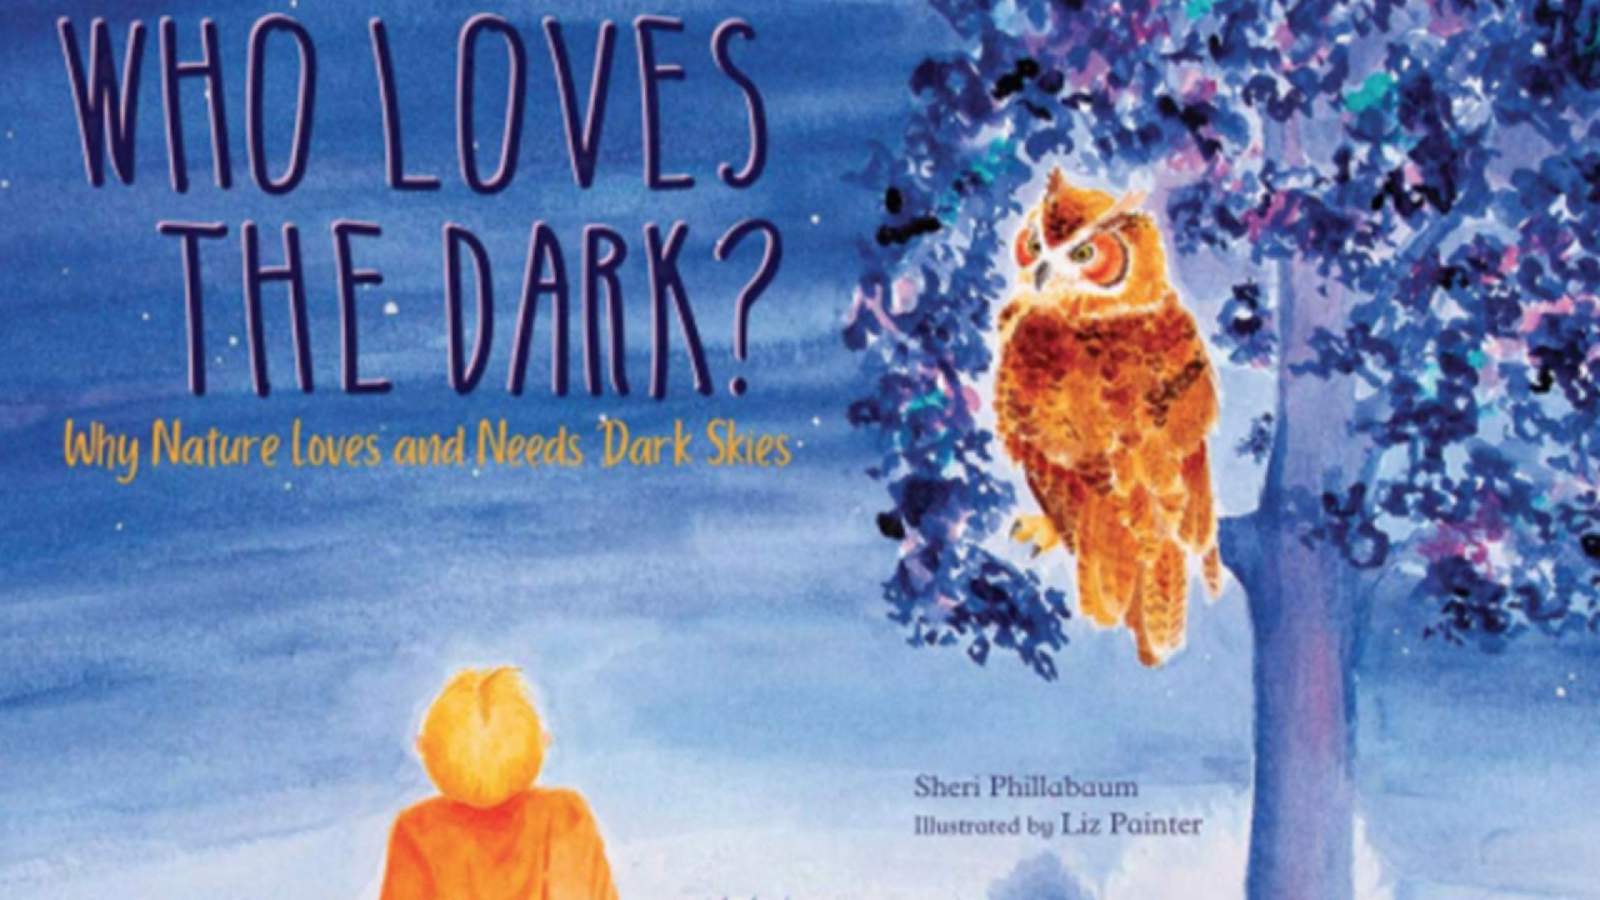 New children’s book encourages kids to embrace and appreciate the dark